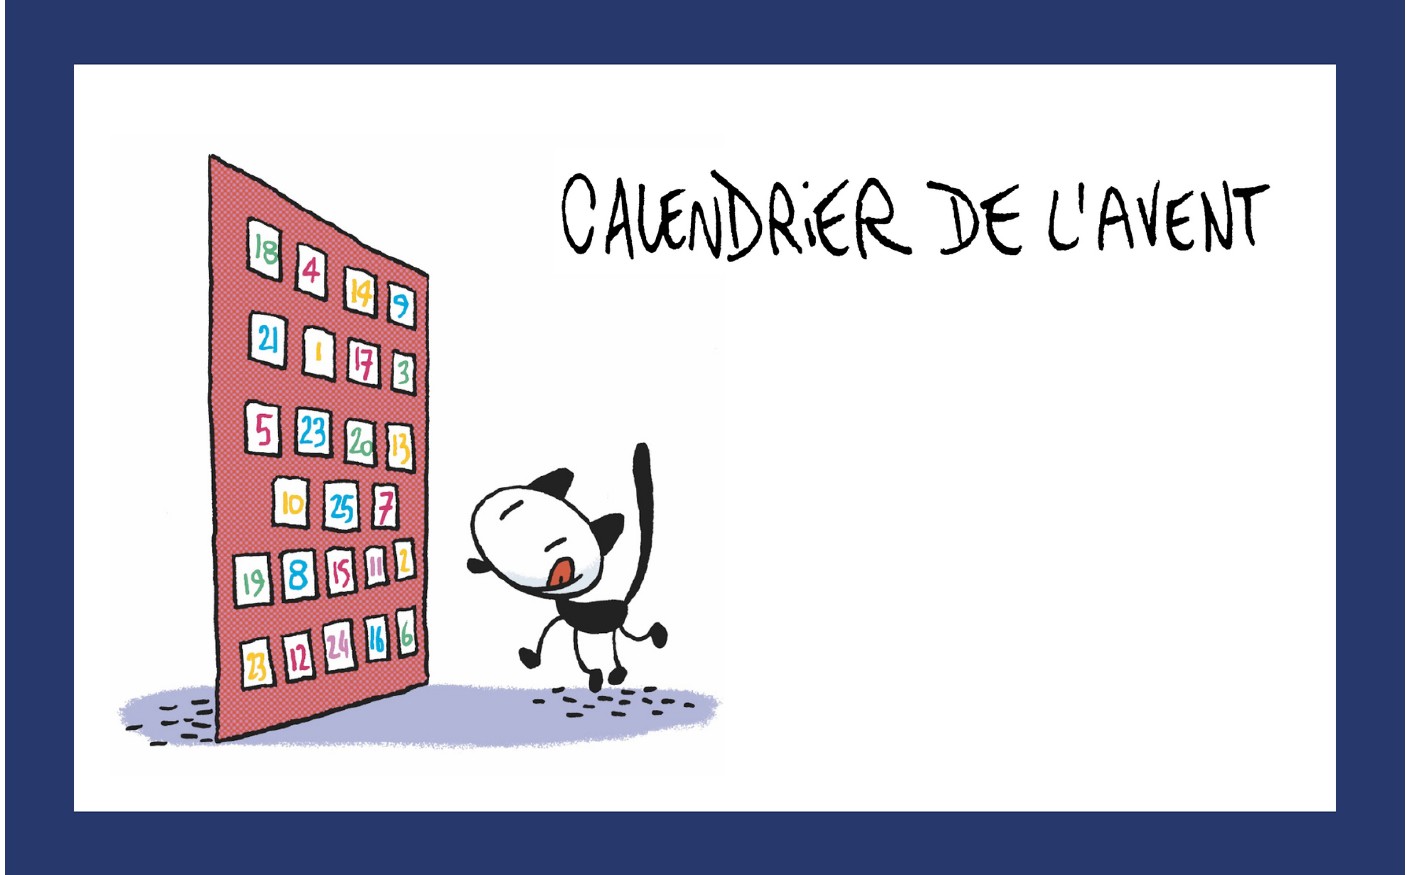 Calendrier site angouleme